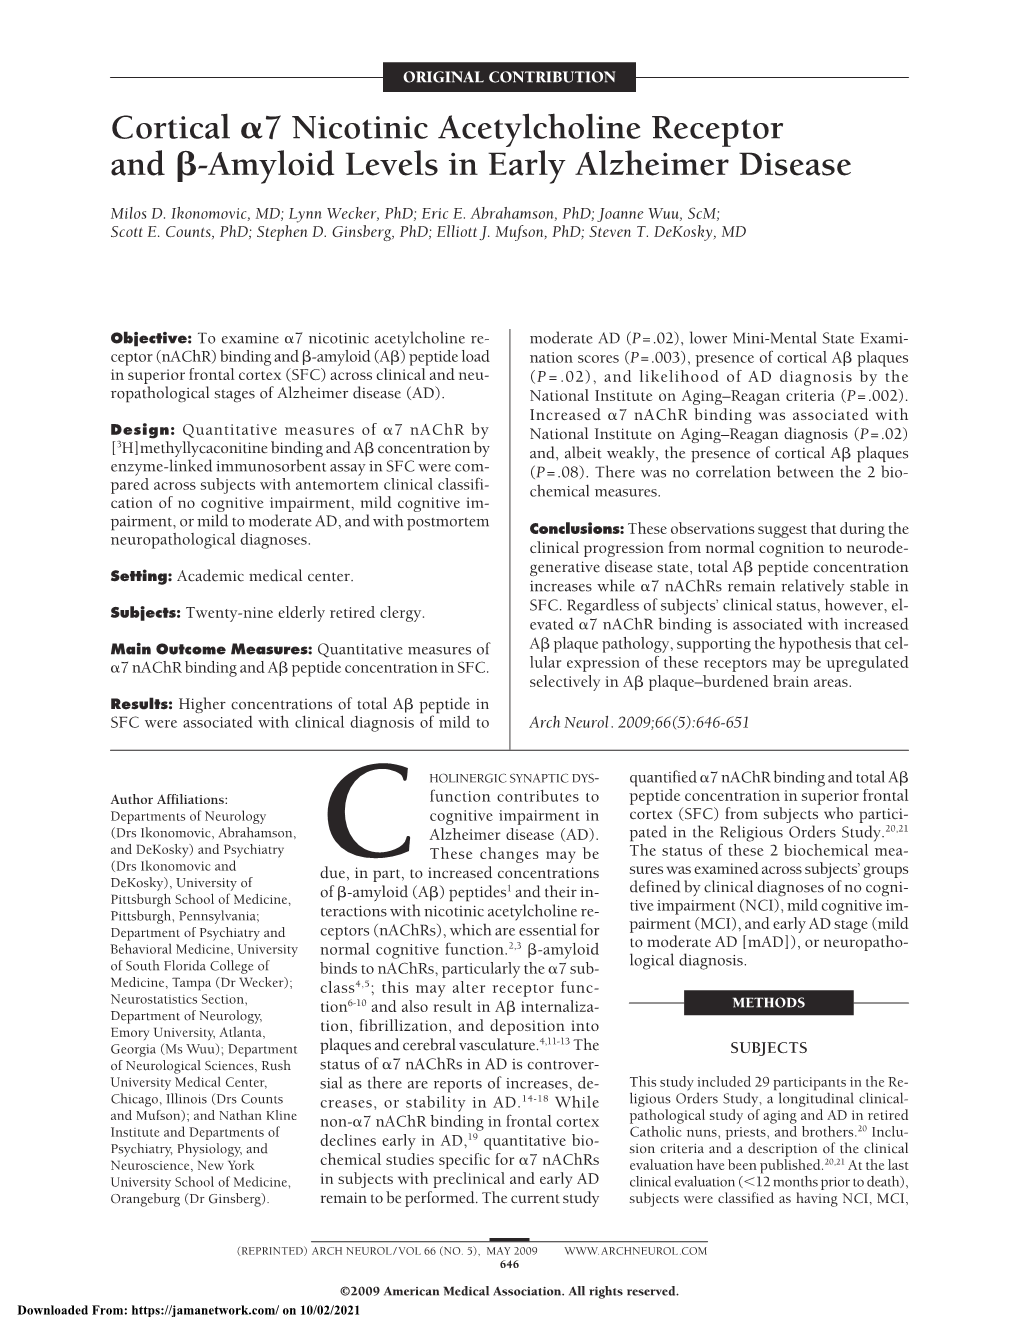 Cortical Α7 Nicotinic Acetylcholine Receptor and Β-Amyloid Levels In